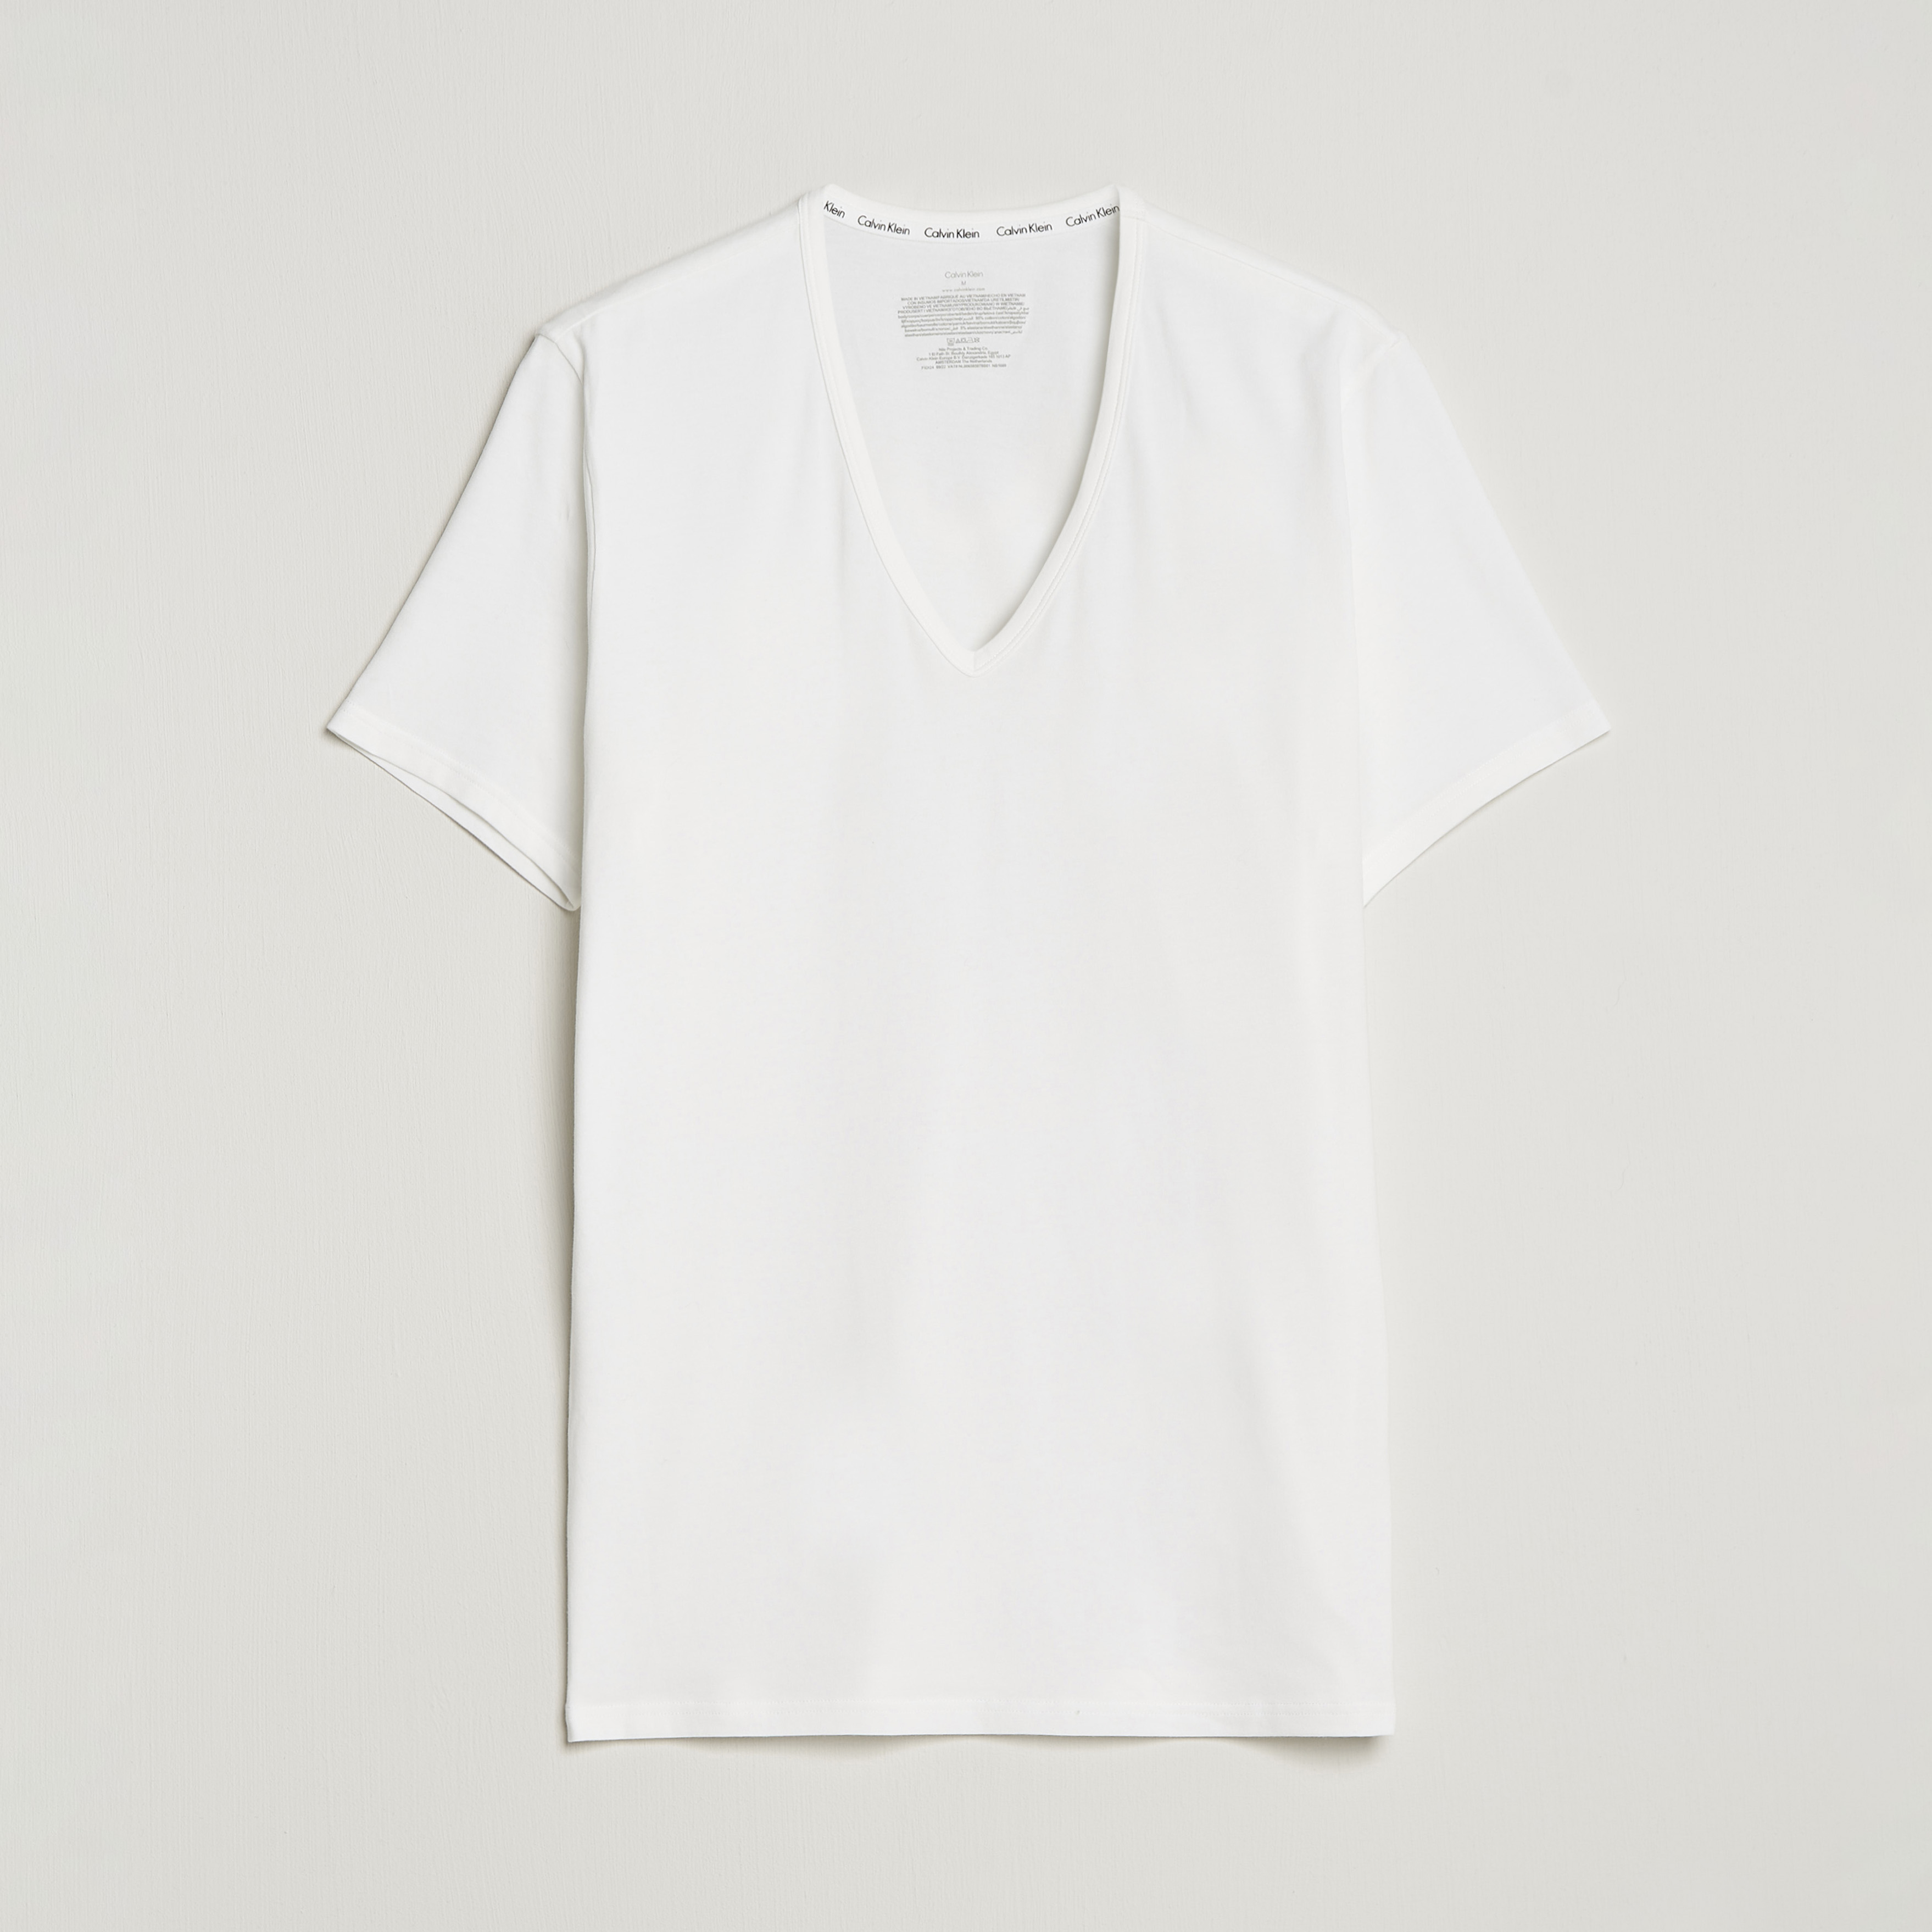 Calvin Klein Cotton V-Neck Tee 2-Pack White bei Care of Carl | V-Shirts